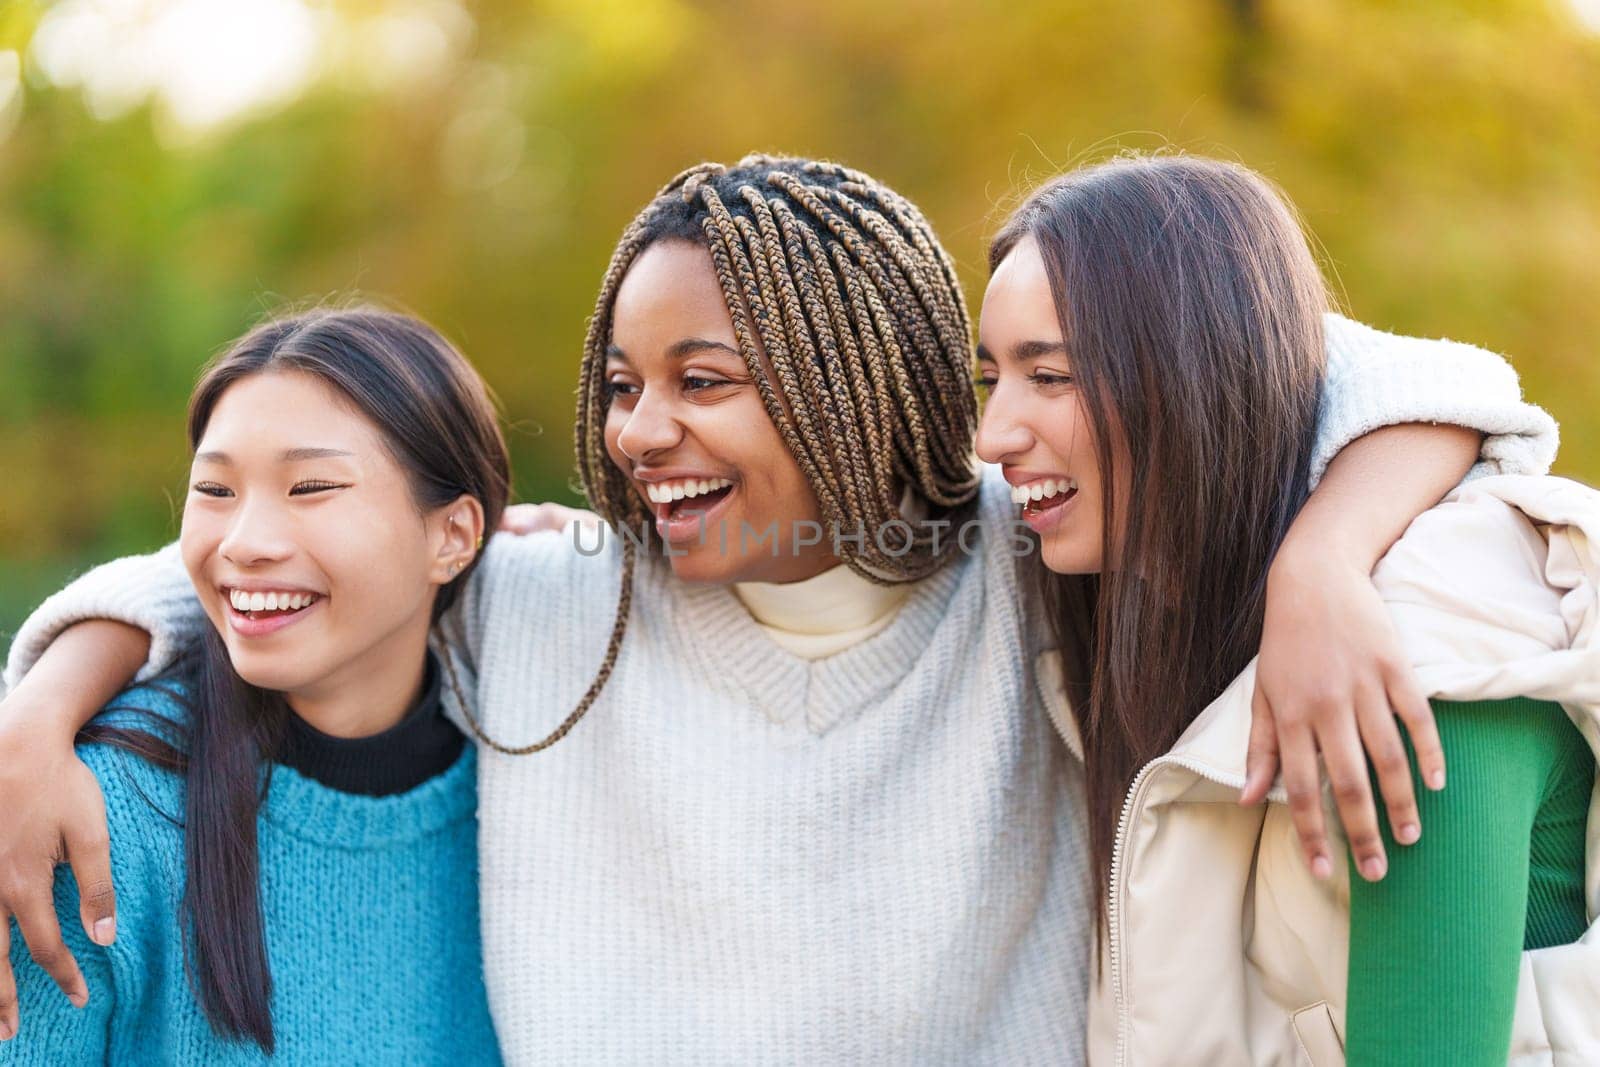 Multiethnic group of female friends embracing while smiling in the park